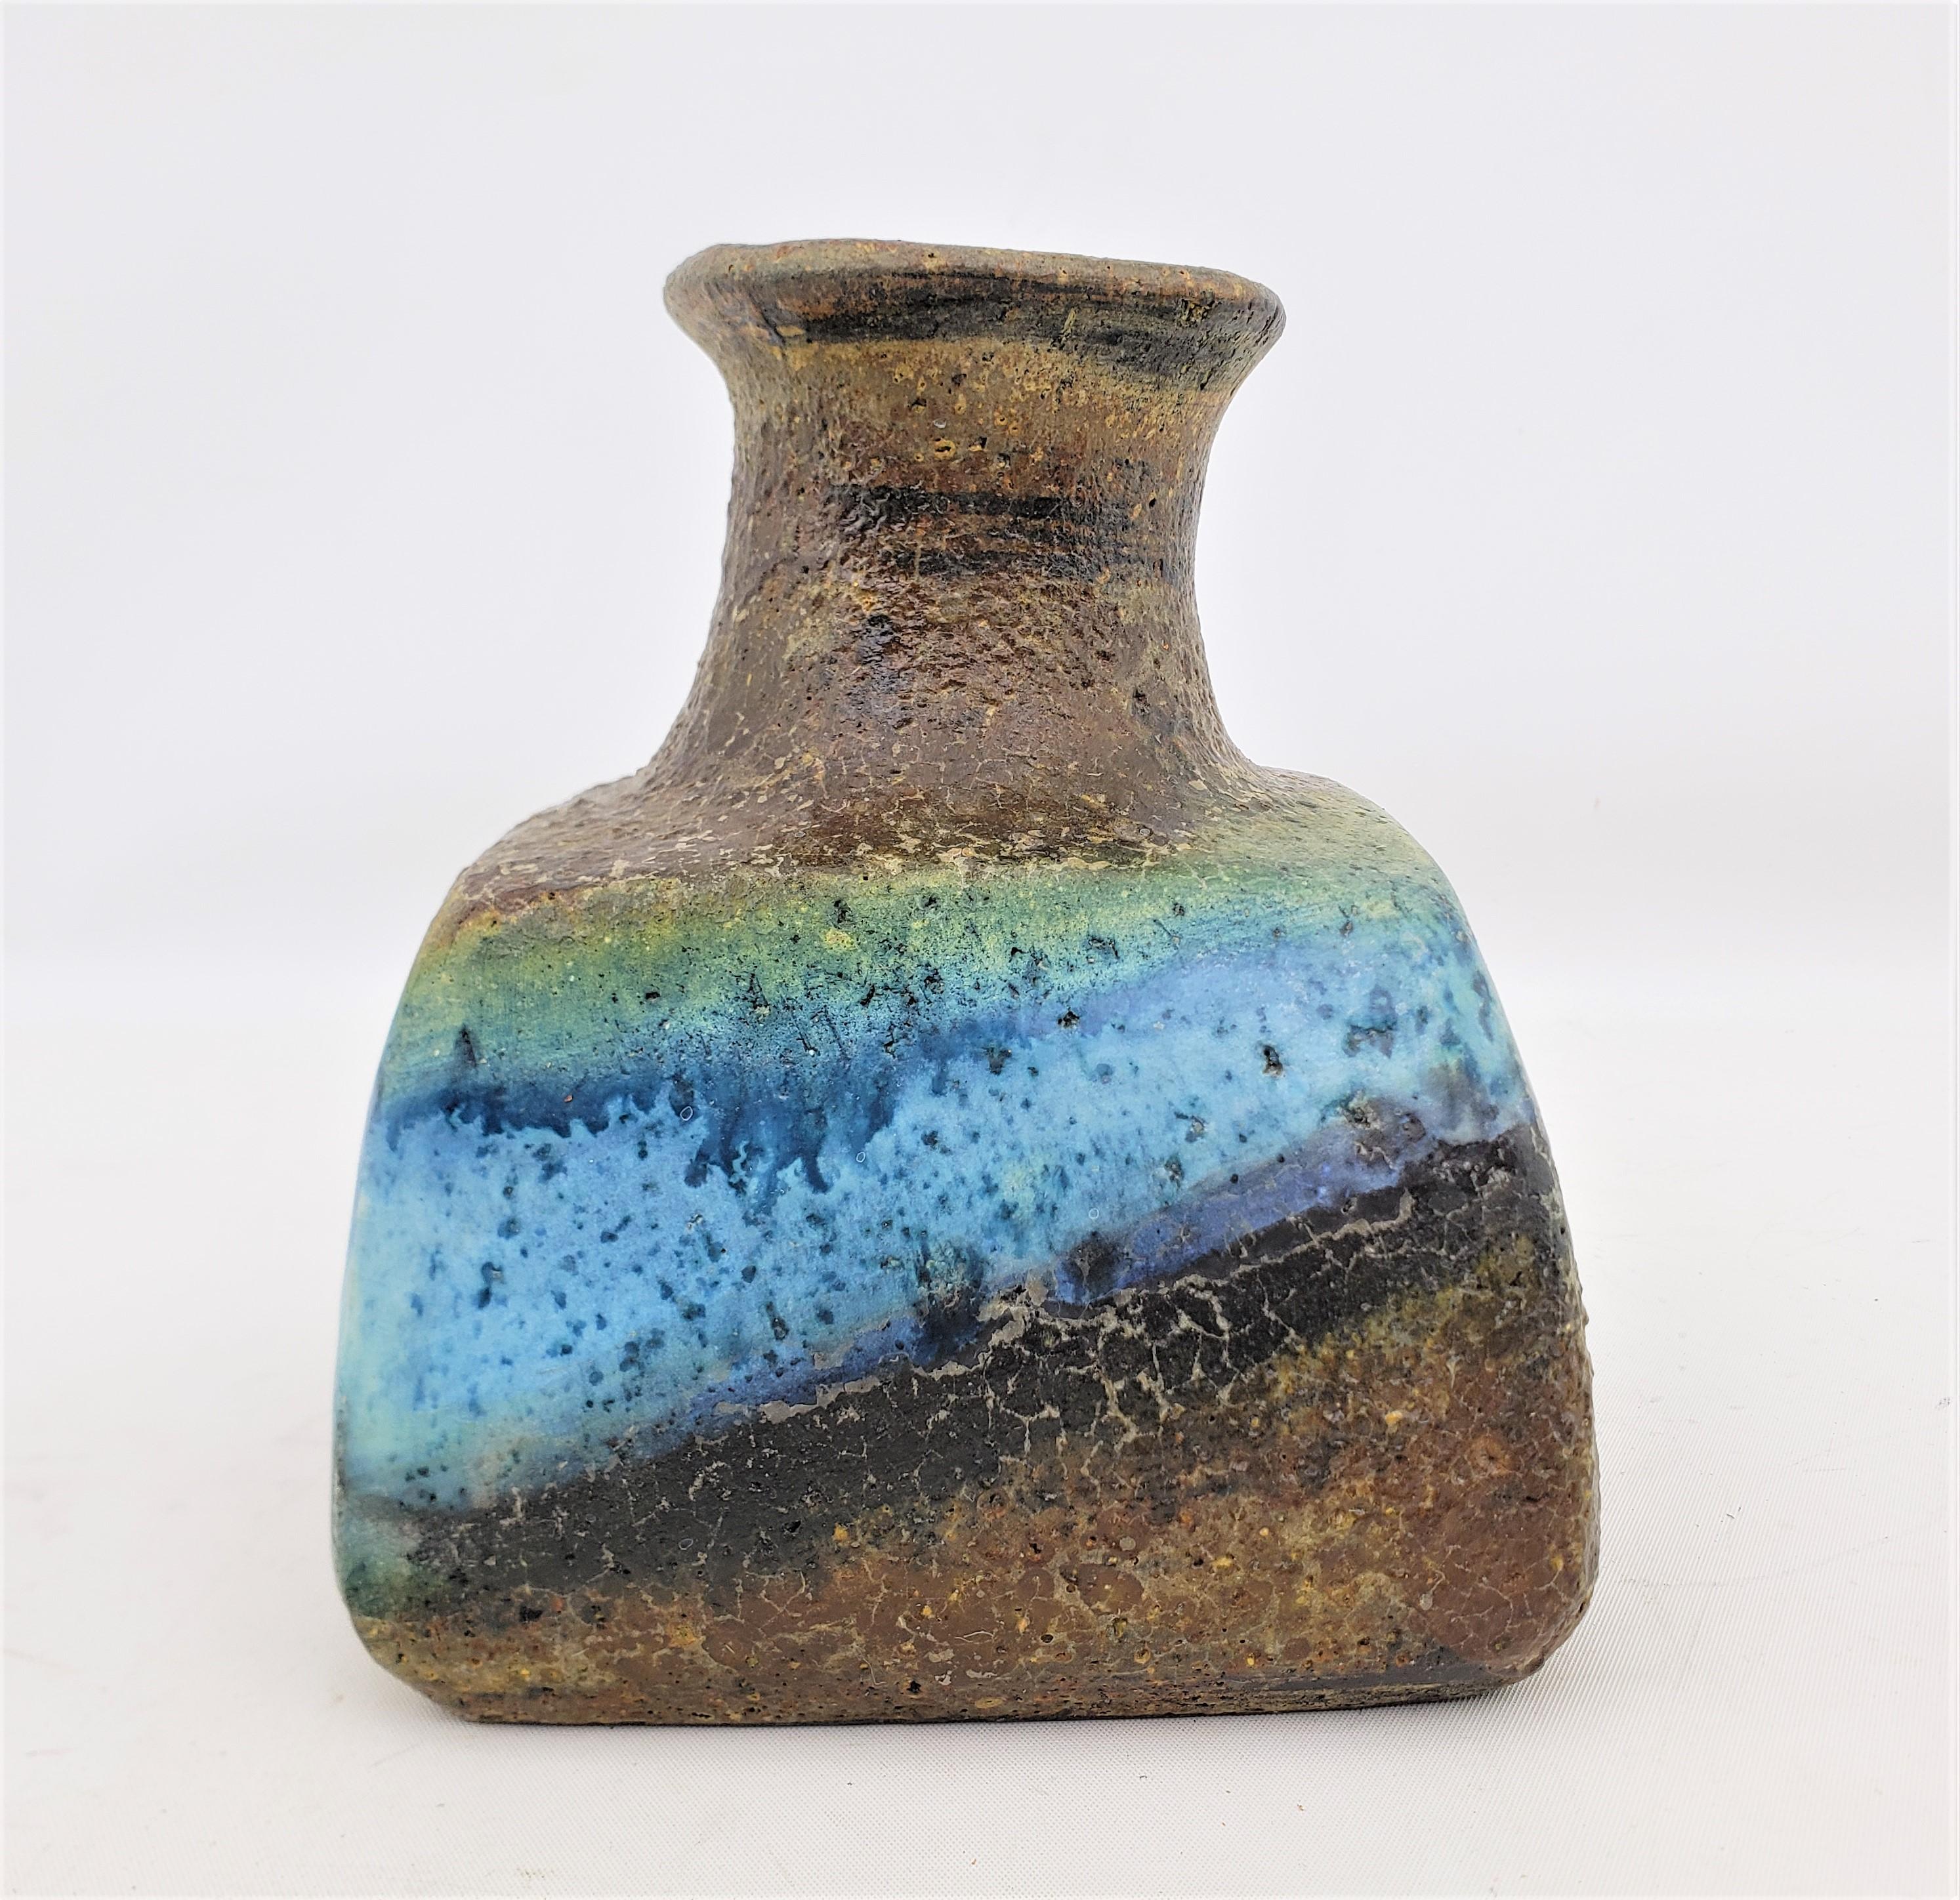 This art pottery vase was done by the renowned Marcello Fantoni of Italy in approximately 1960 in the period Mid-Century Modern style. The vase is done with a thick dark brown clay and has a squared or 'pillow' shaped base with a stout round neck.